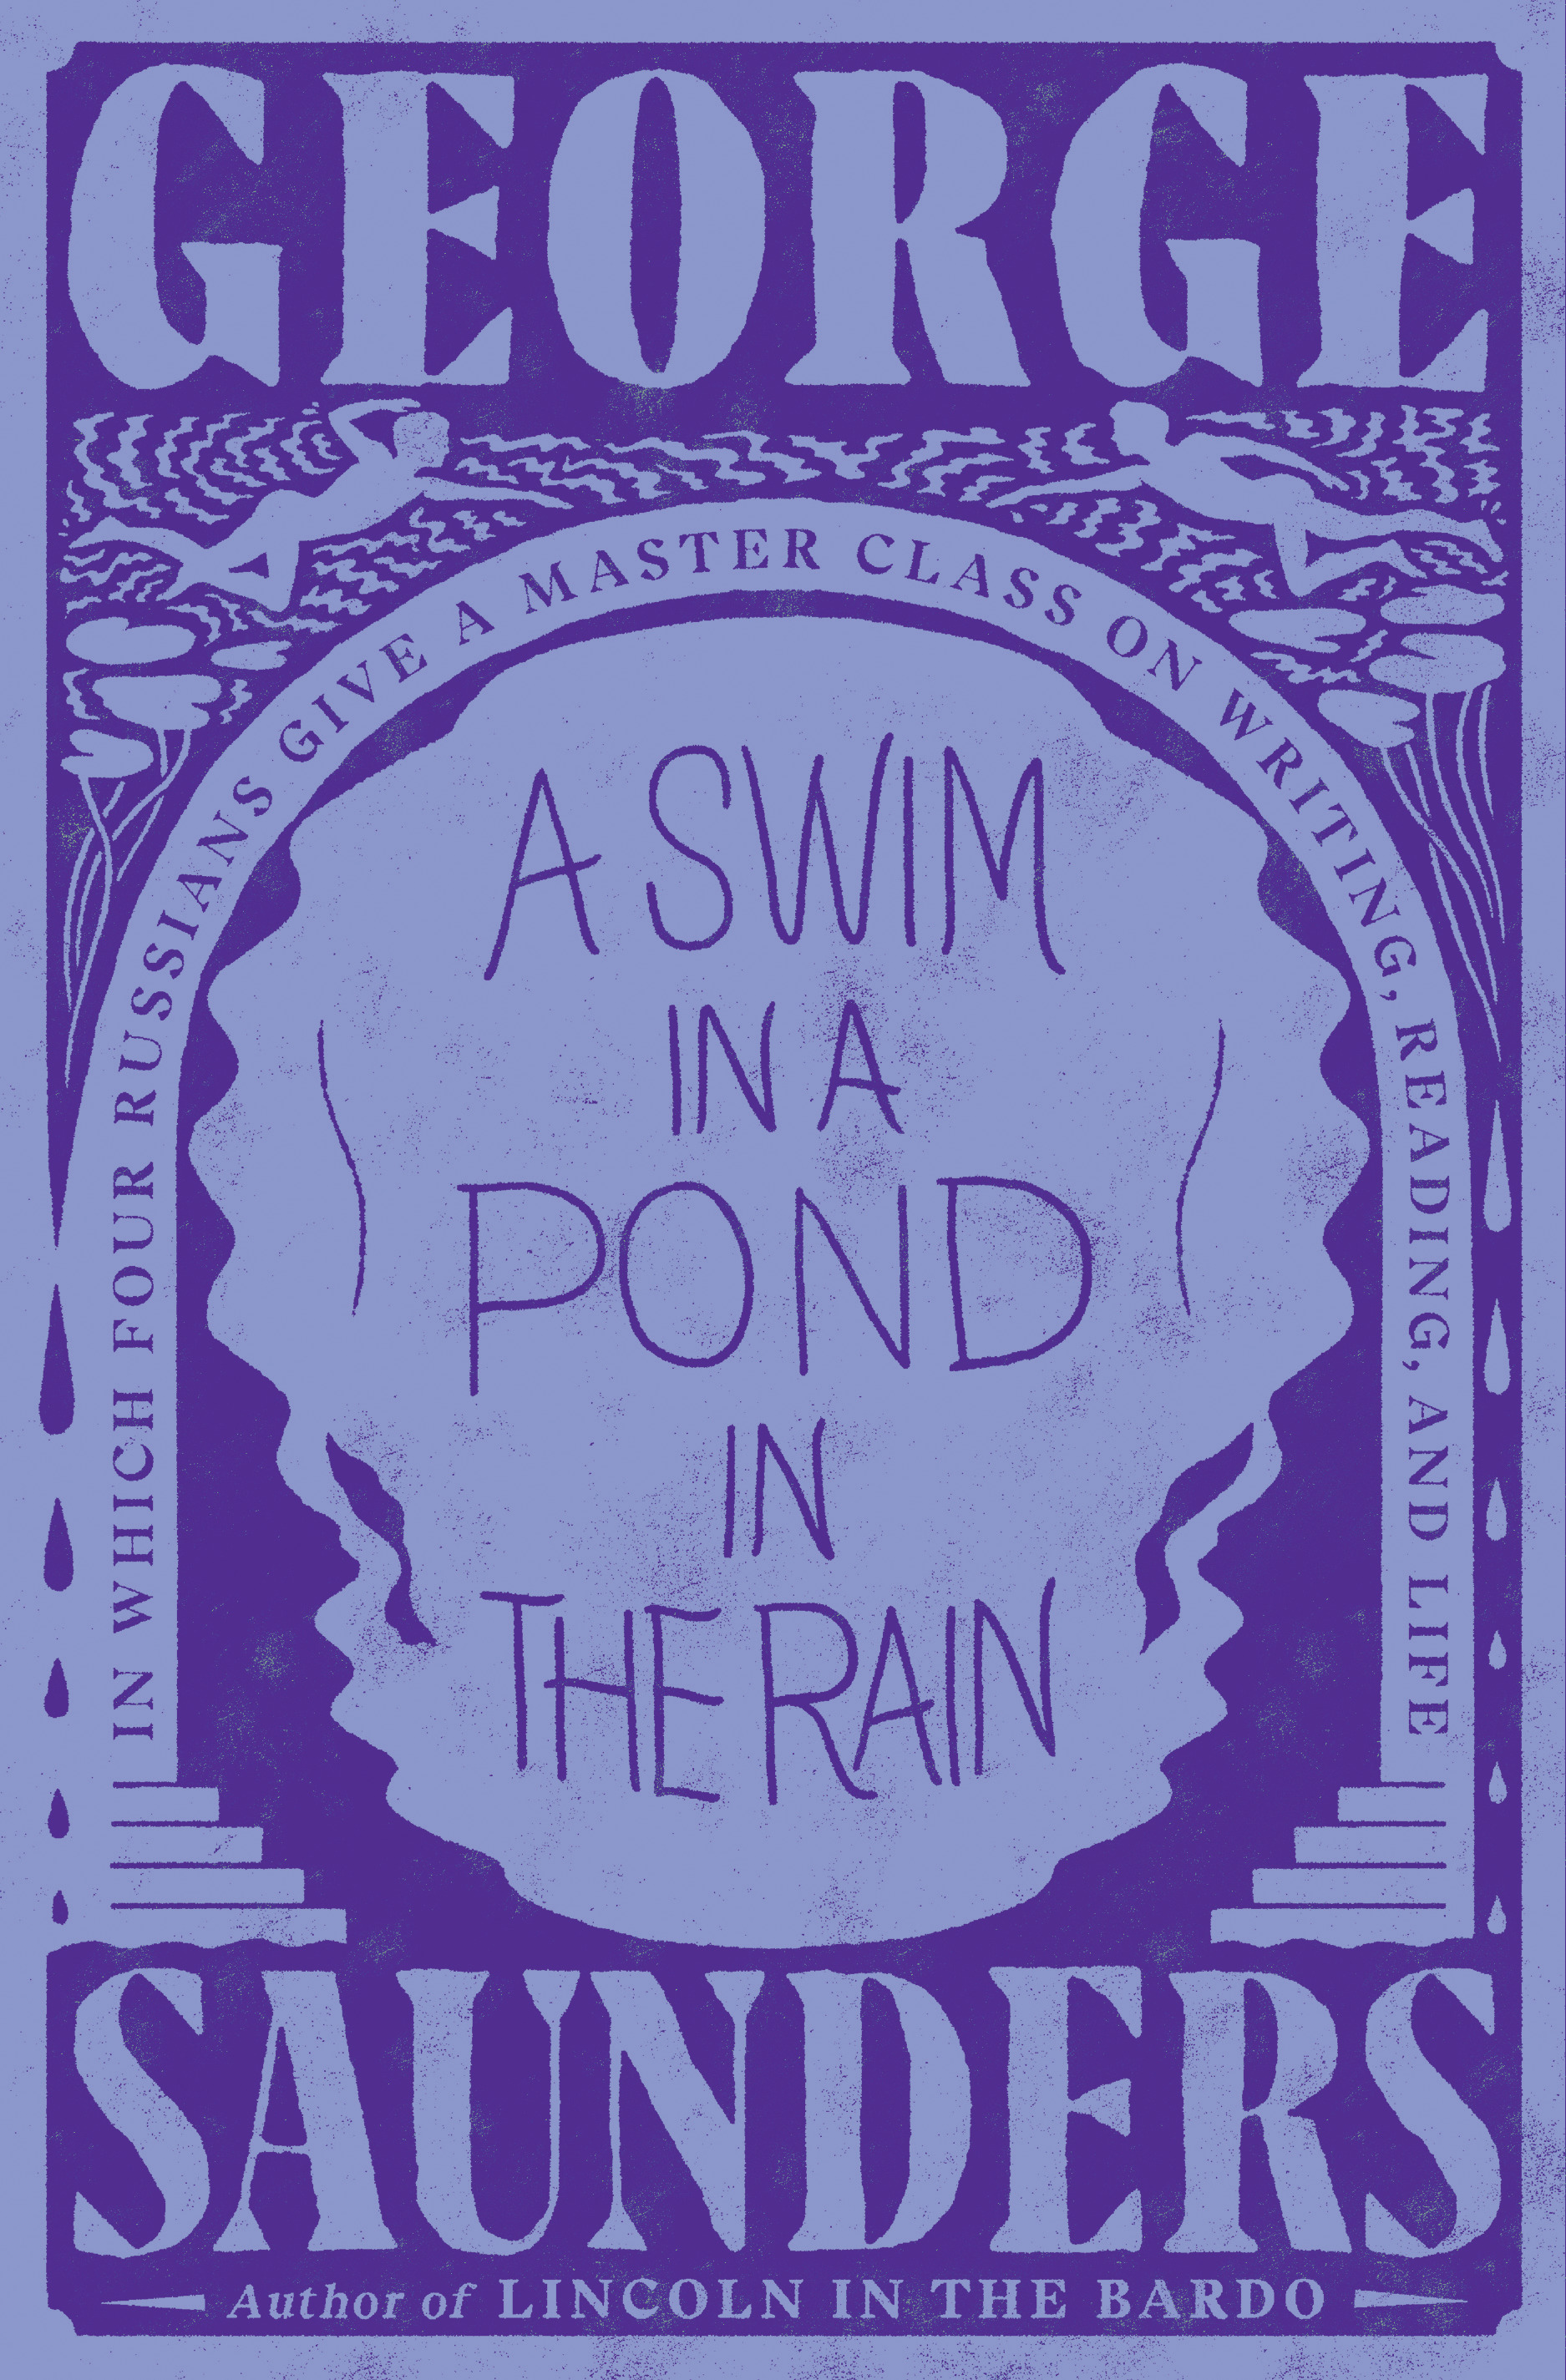 George Saunders' 'A Swim In A Pond': Lessons in Literature & Life